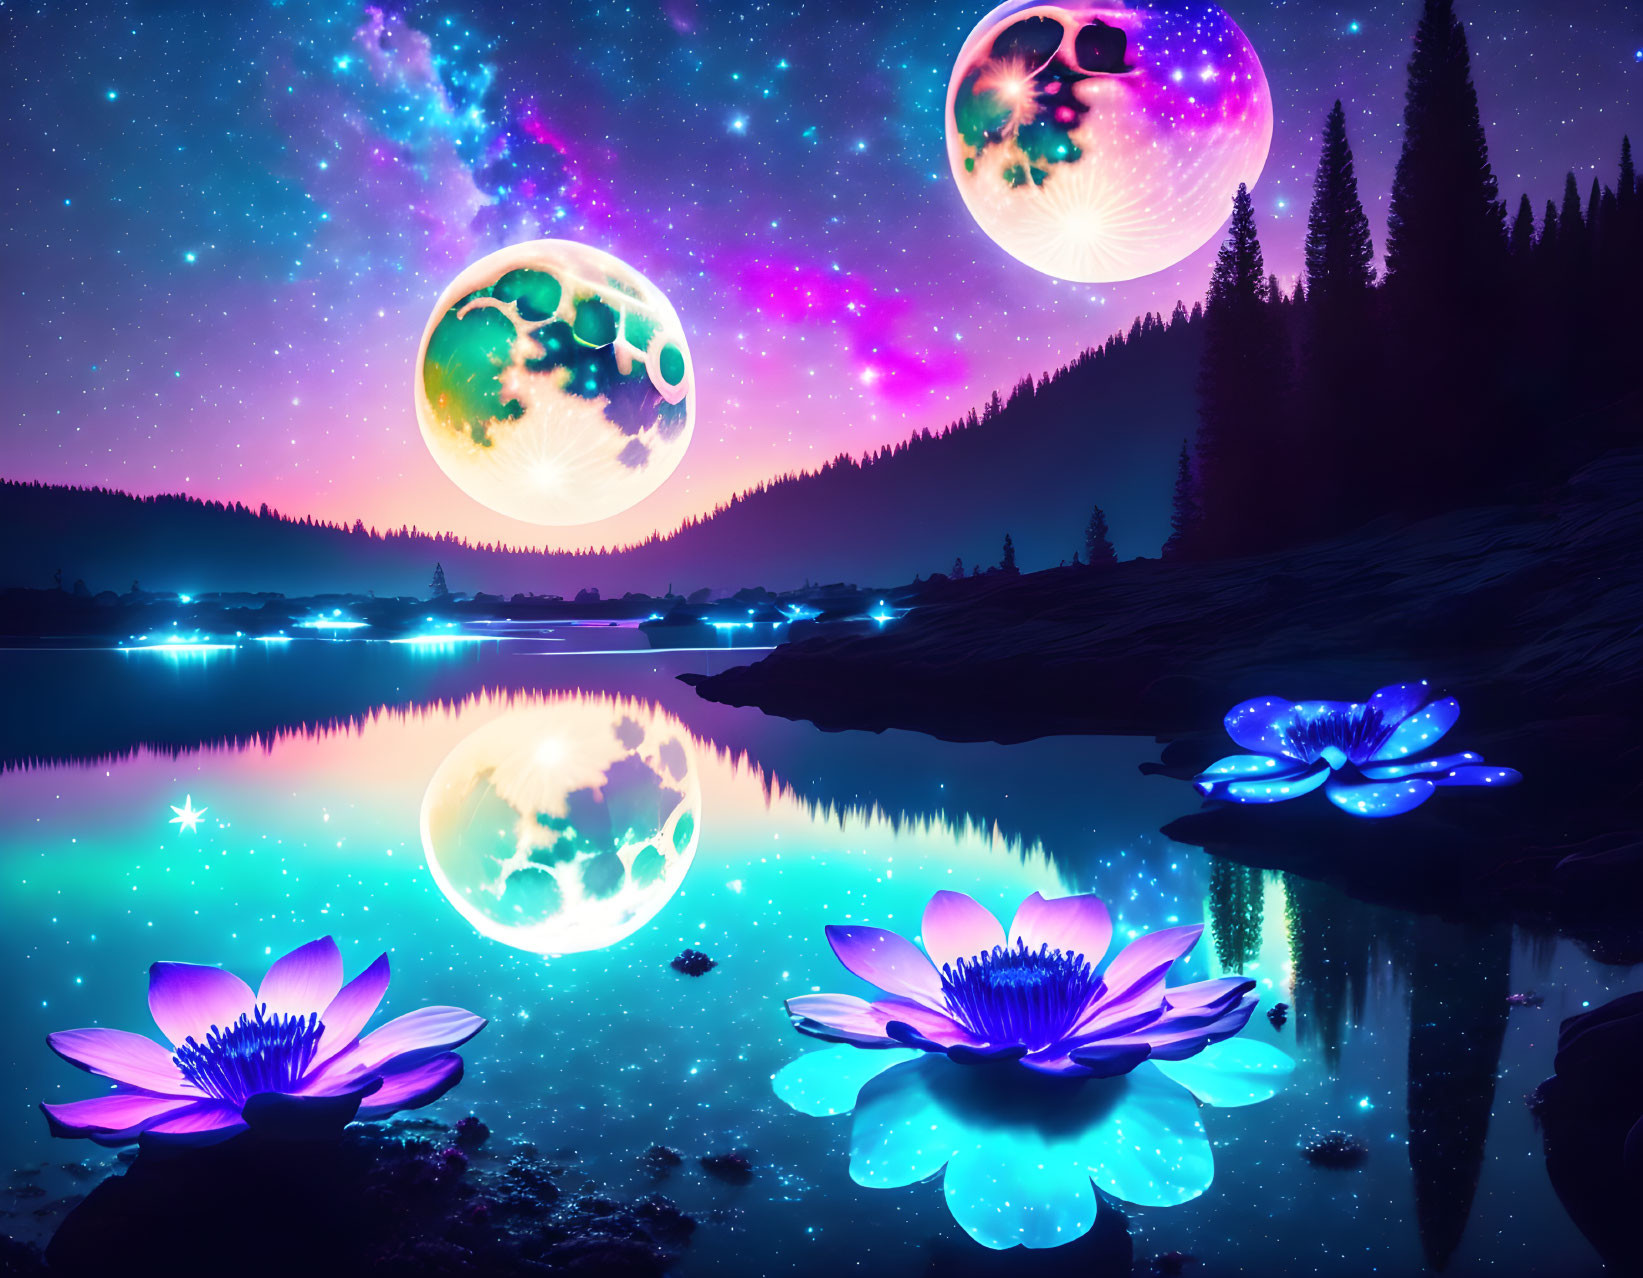 Nighttime lakeside digital art with fantasy planets, neon lotus flowers, and starry nebula